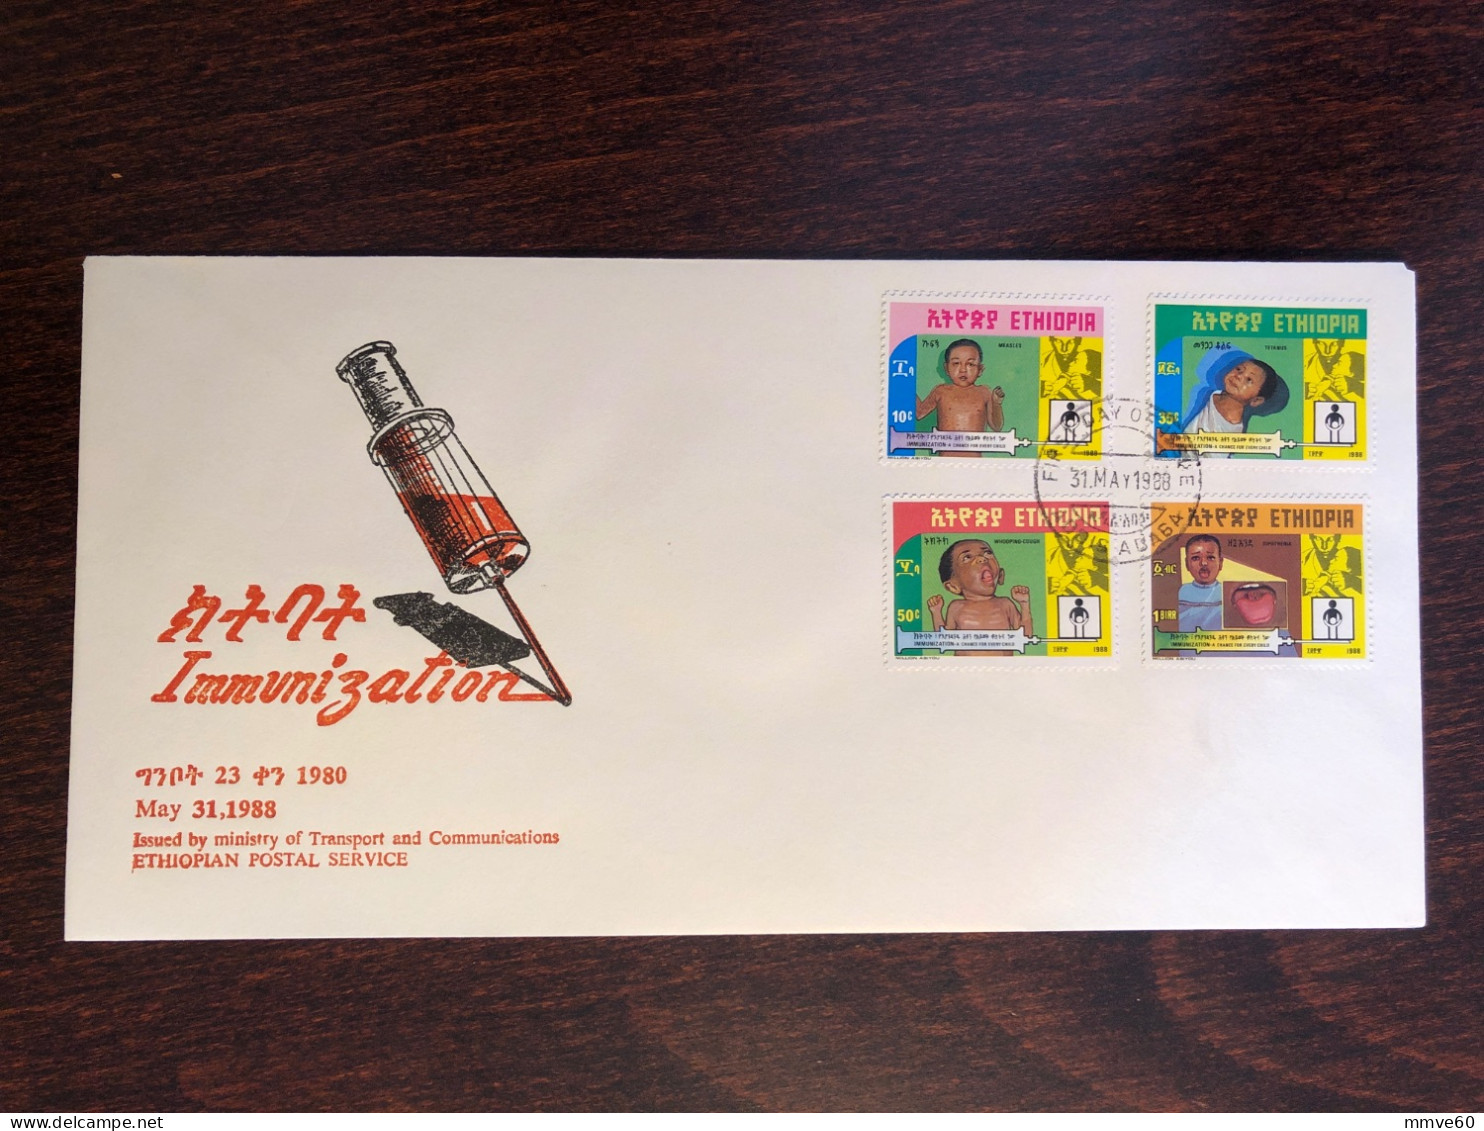 ETHIOPIA FDC COVER 1988 YEAR IMMUNIZATION - MEASLES, TETANUS, DIPHTHERIA, WHOOPING COUGH HEALTH MEDICINE STAMPS - Ethiopie